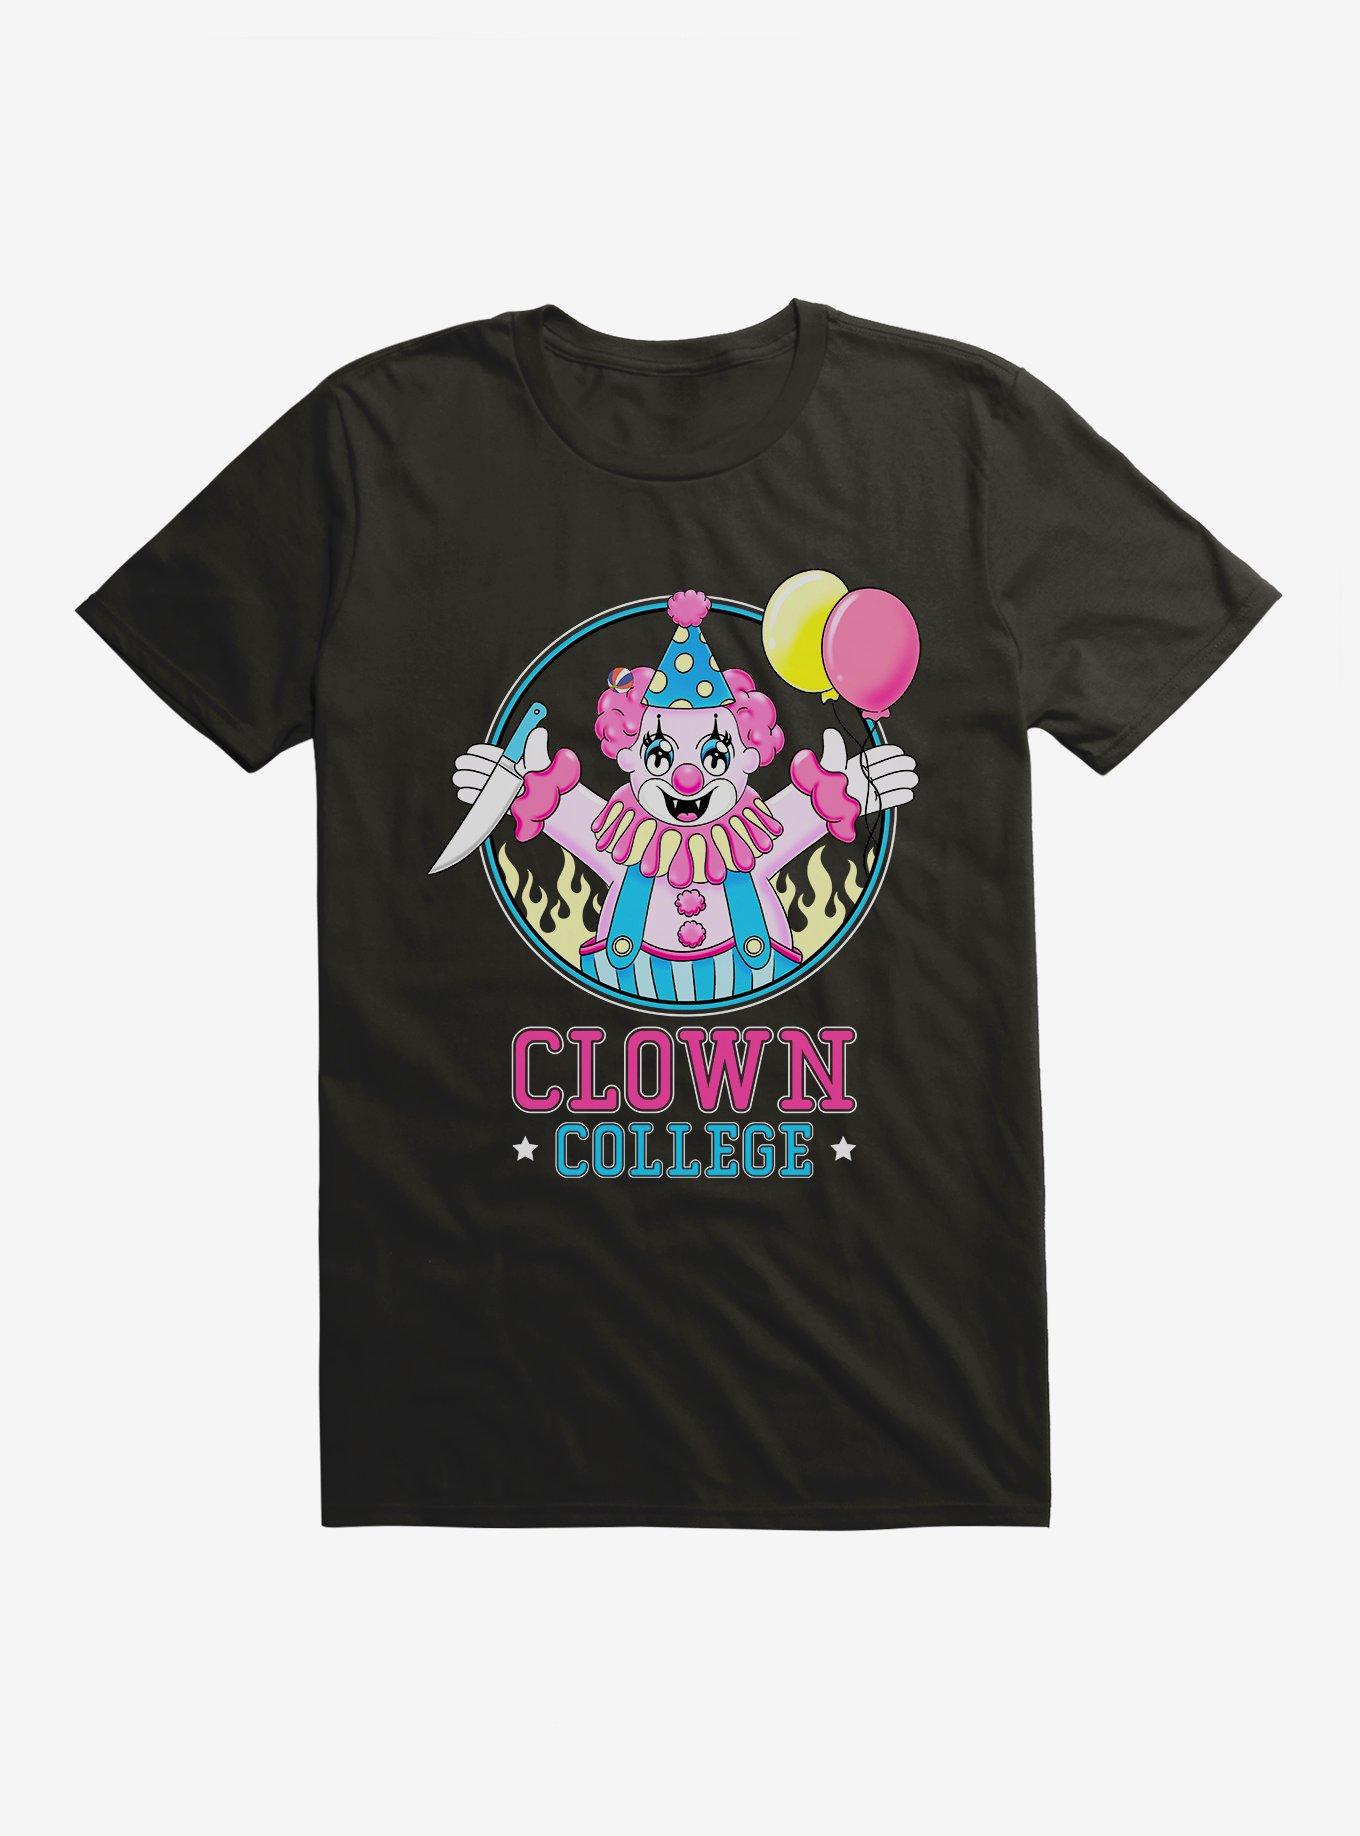 Hot Topic The College Clown T-Shirt